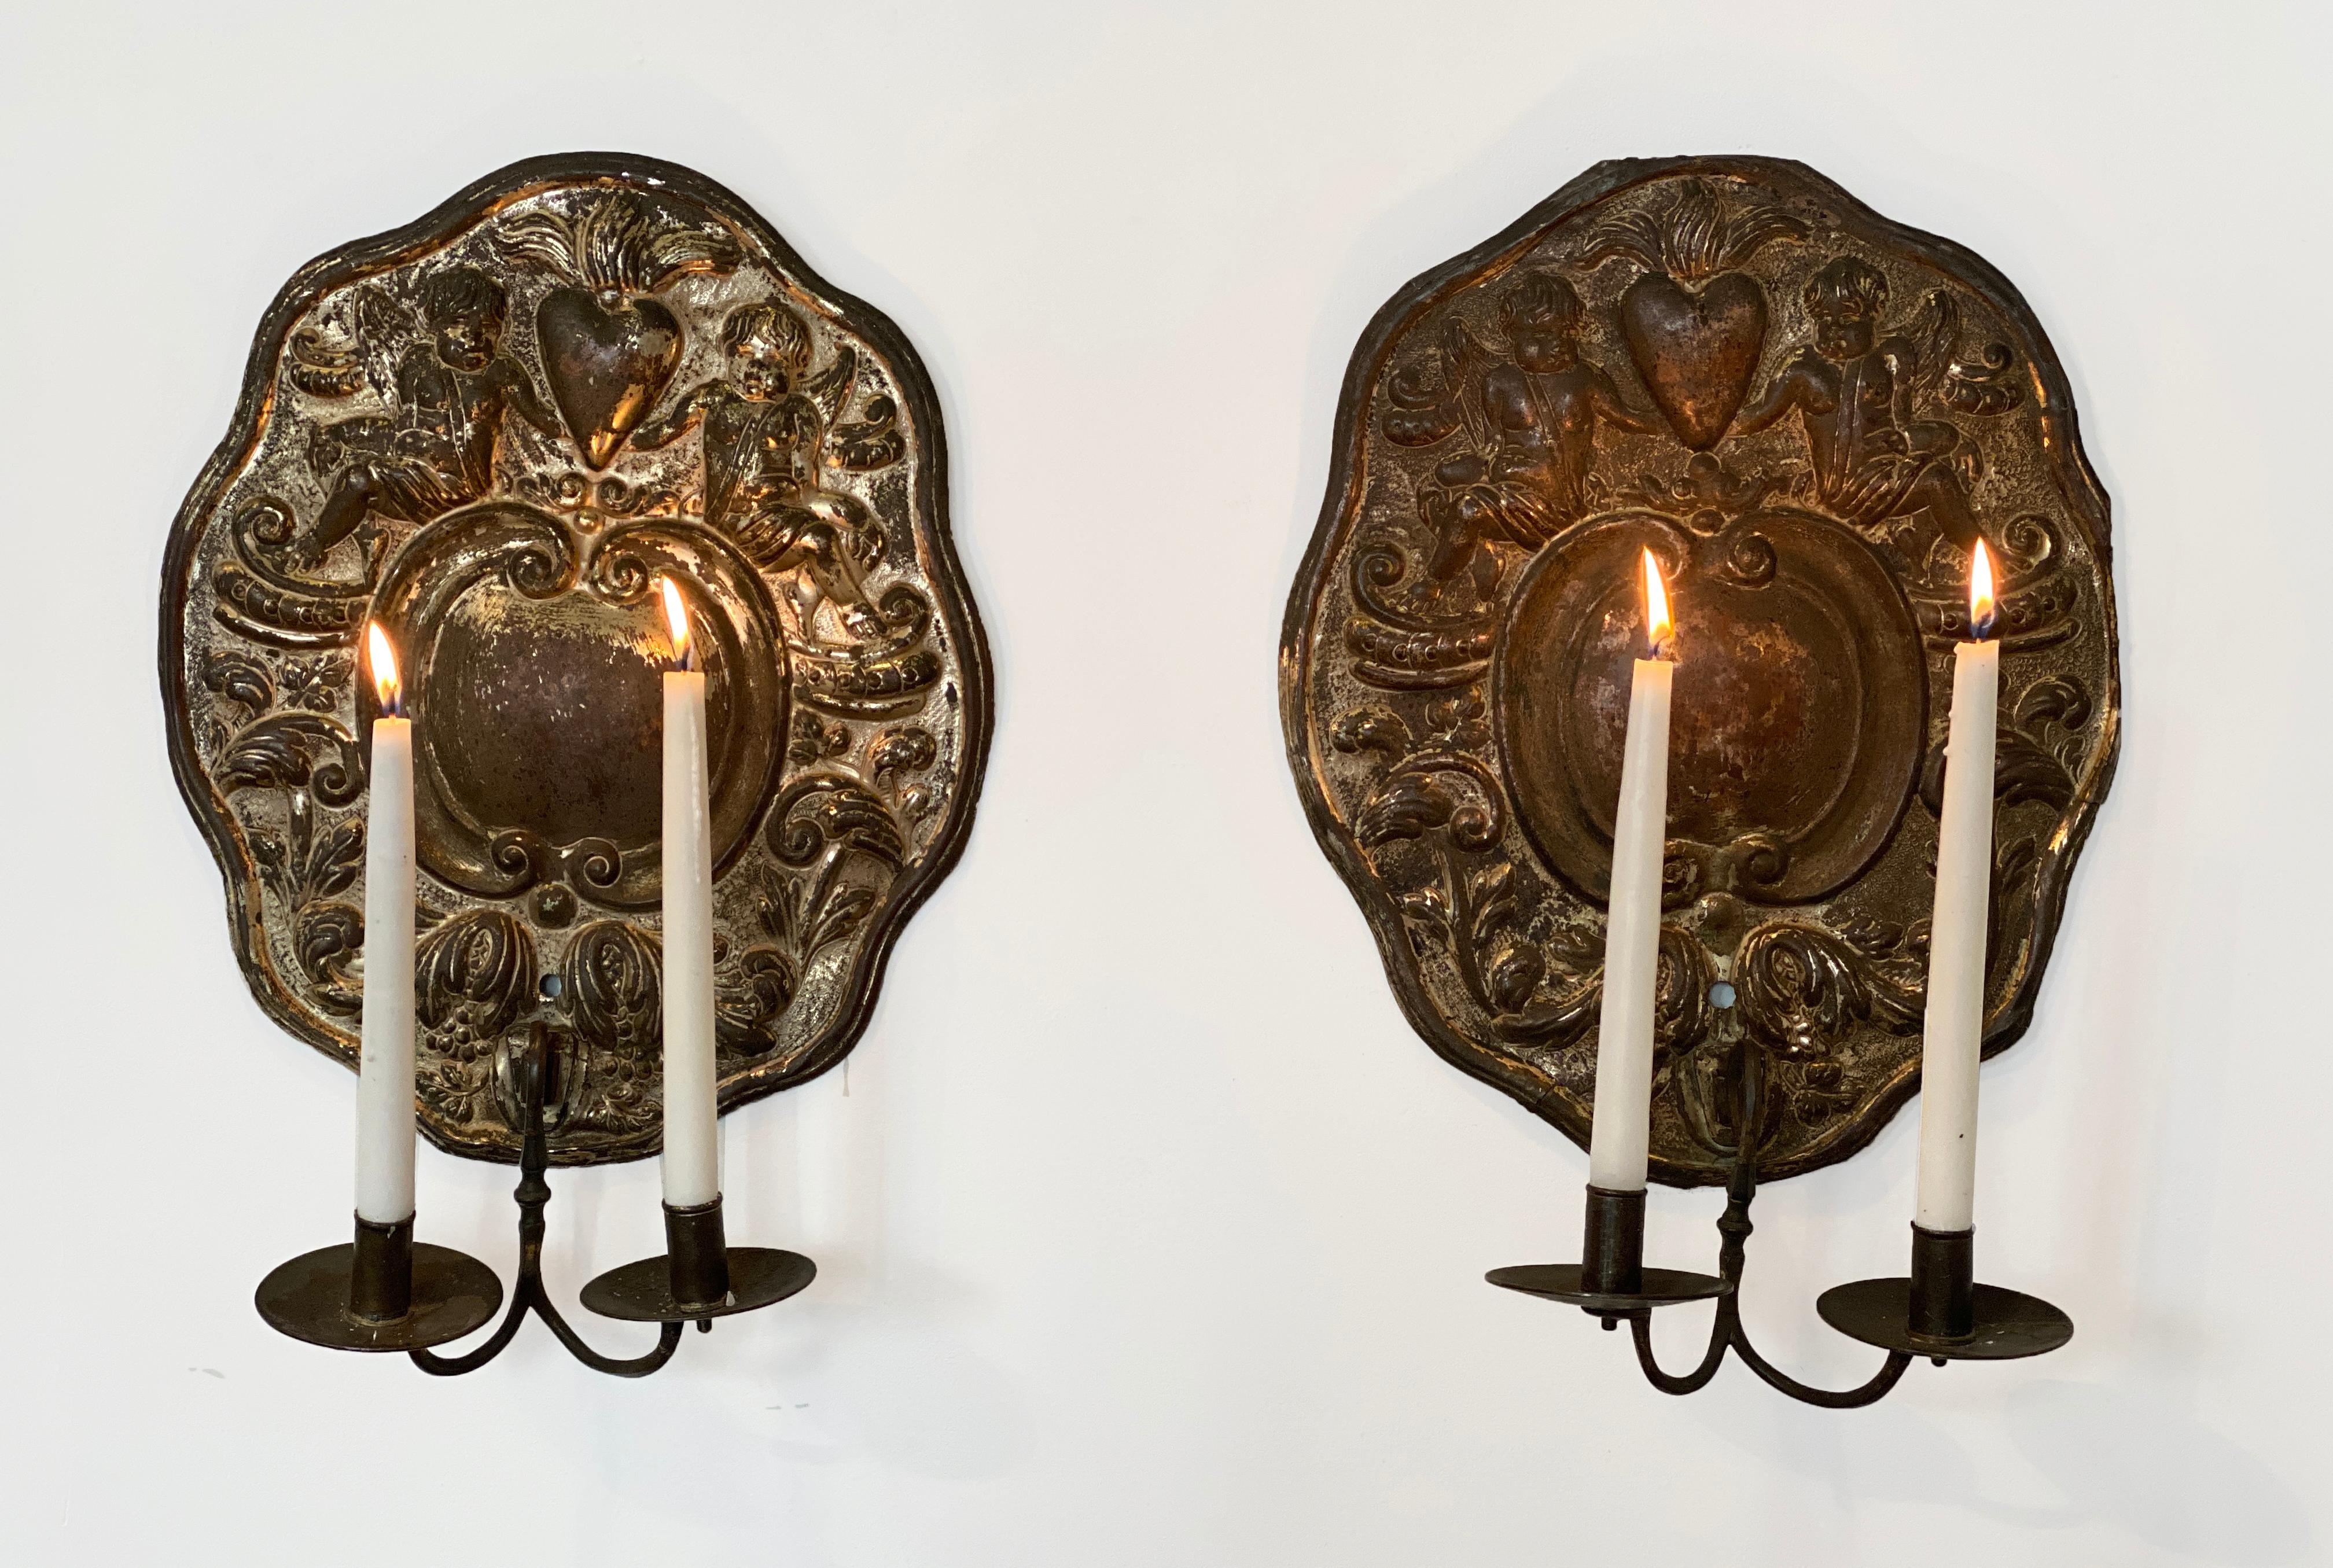 Pair of Dutch Baroque double-arm sconces, origin: Holland, circa 1760, silver plate repoussé.

Two candle arms with back plates decorated with centre cartouche surrounded by cherubs / putti, foliage and charming hearts. 

We also sell bespoke,